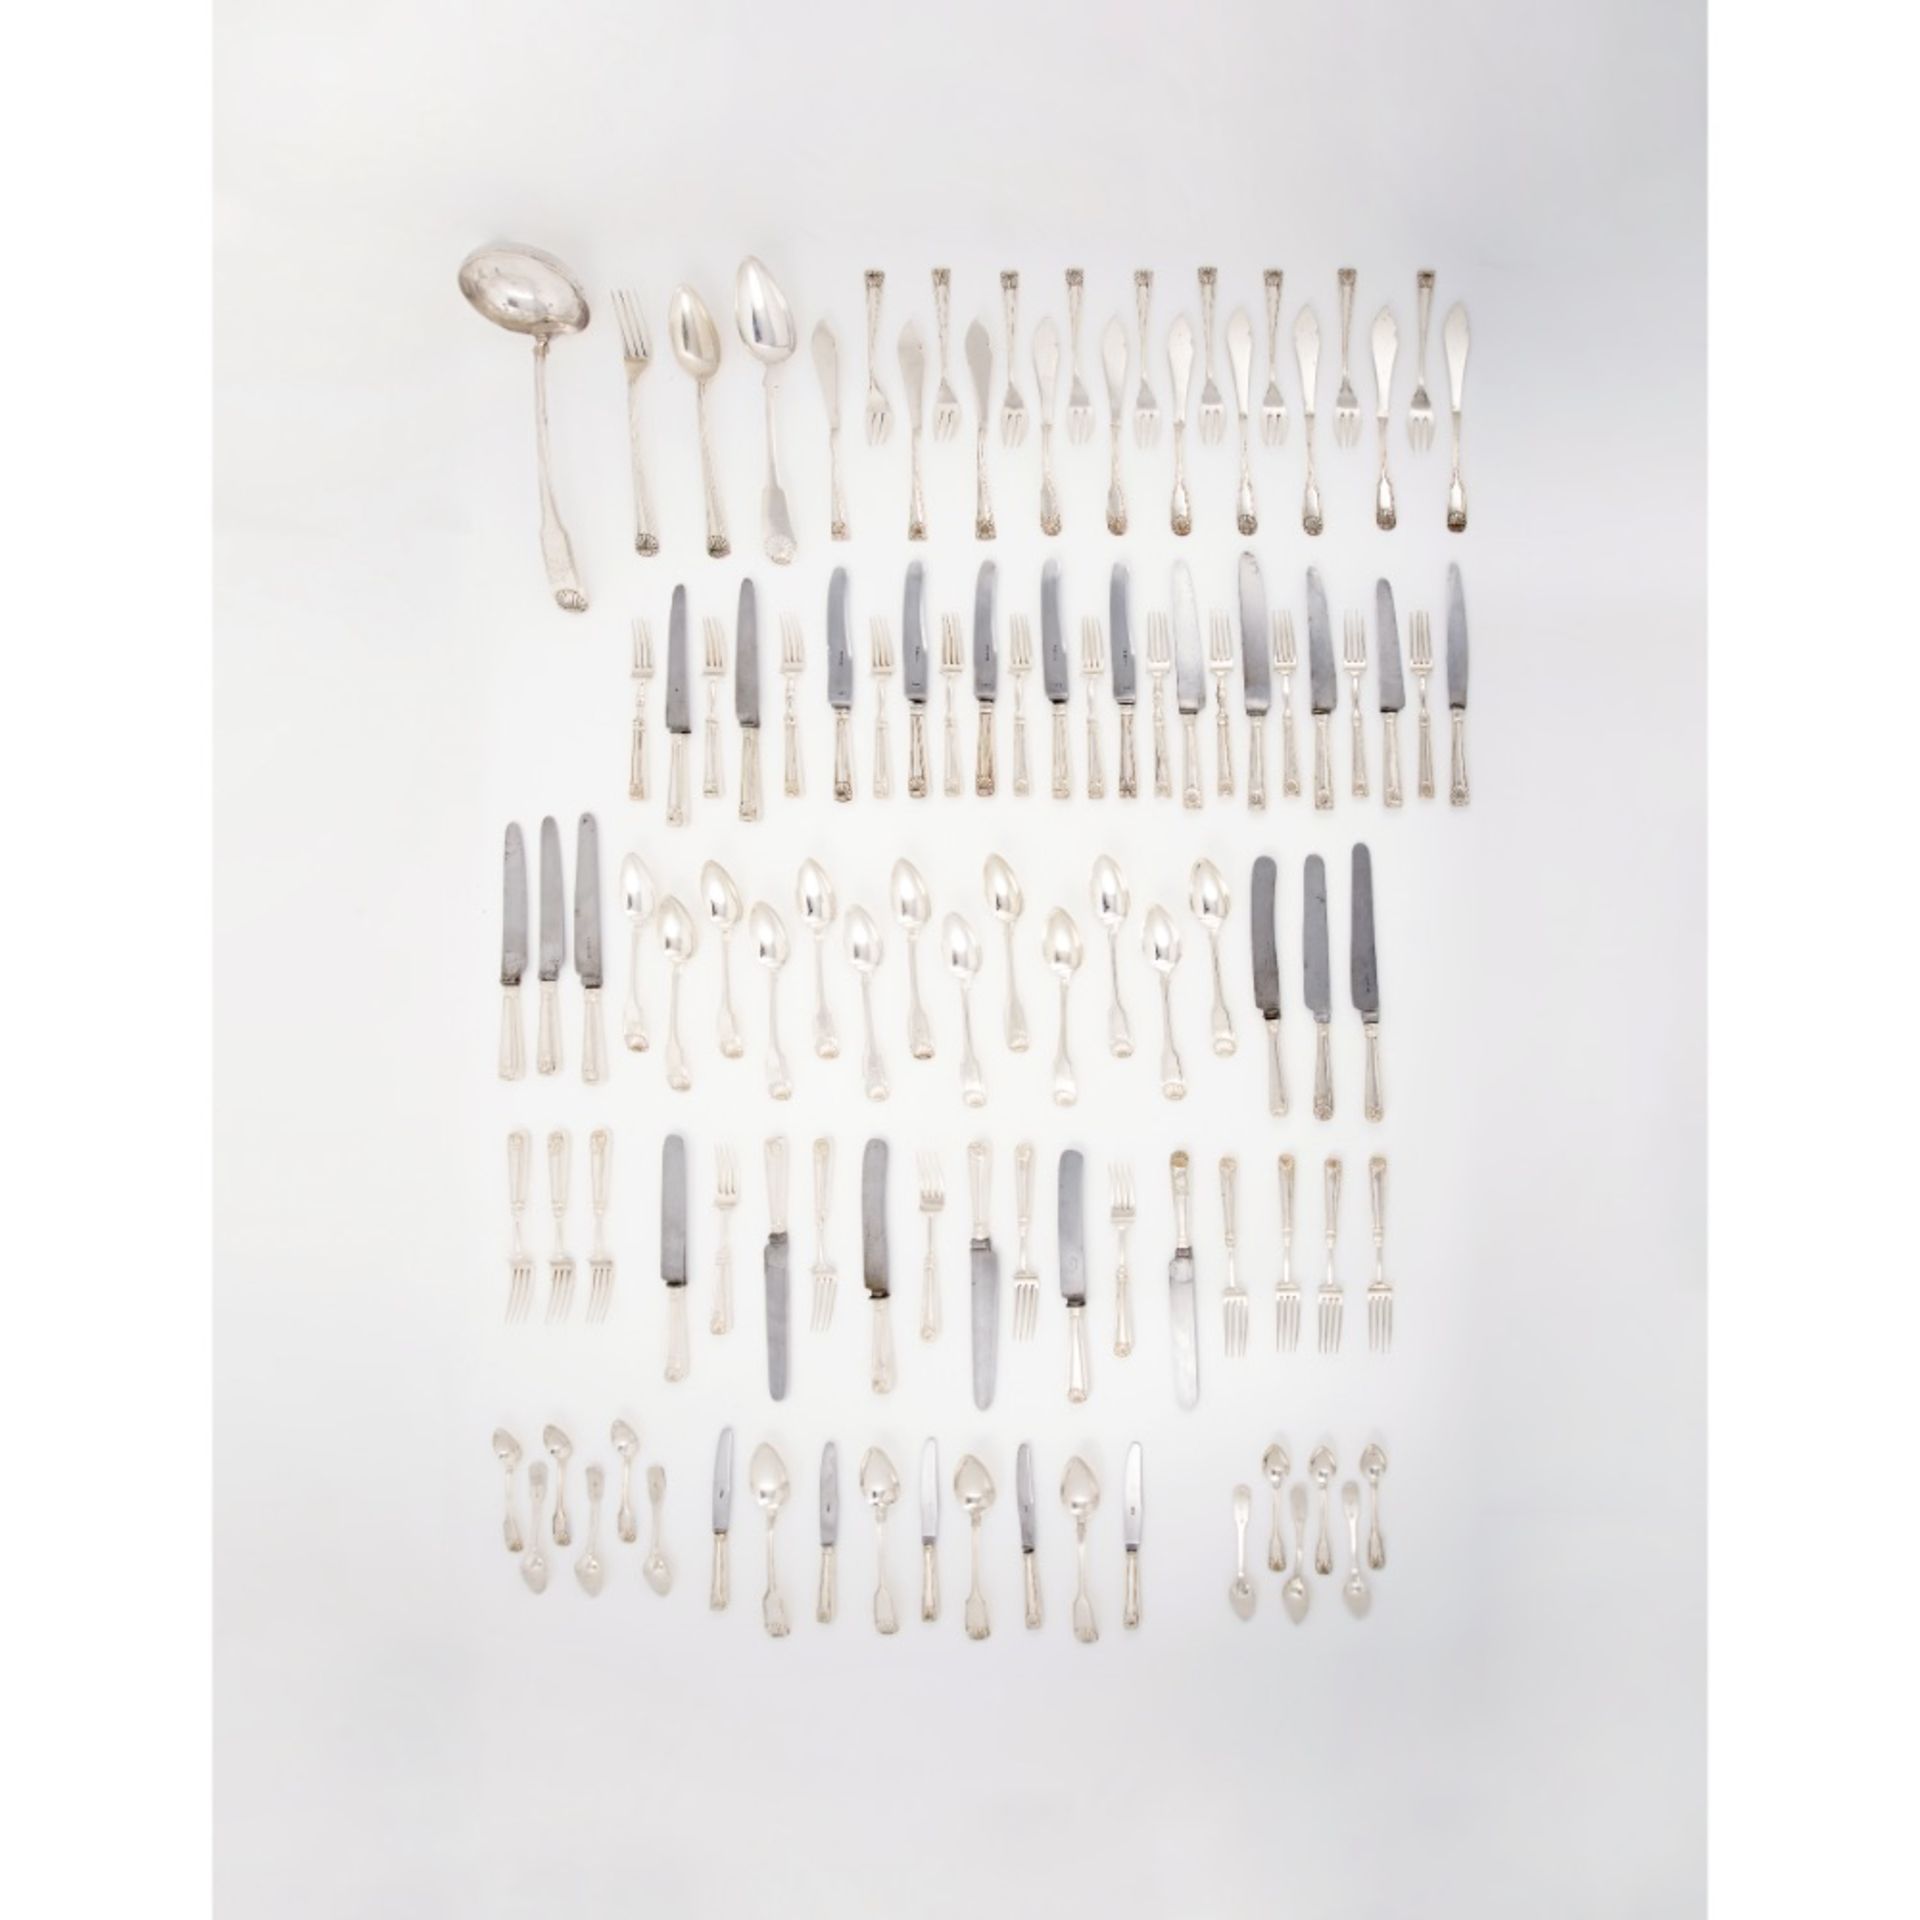 A cutlery set for 12 seaters